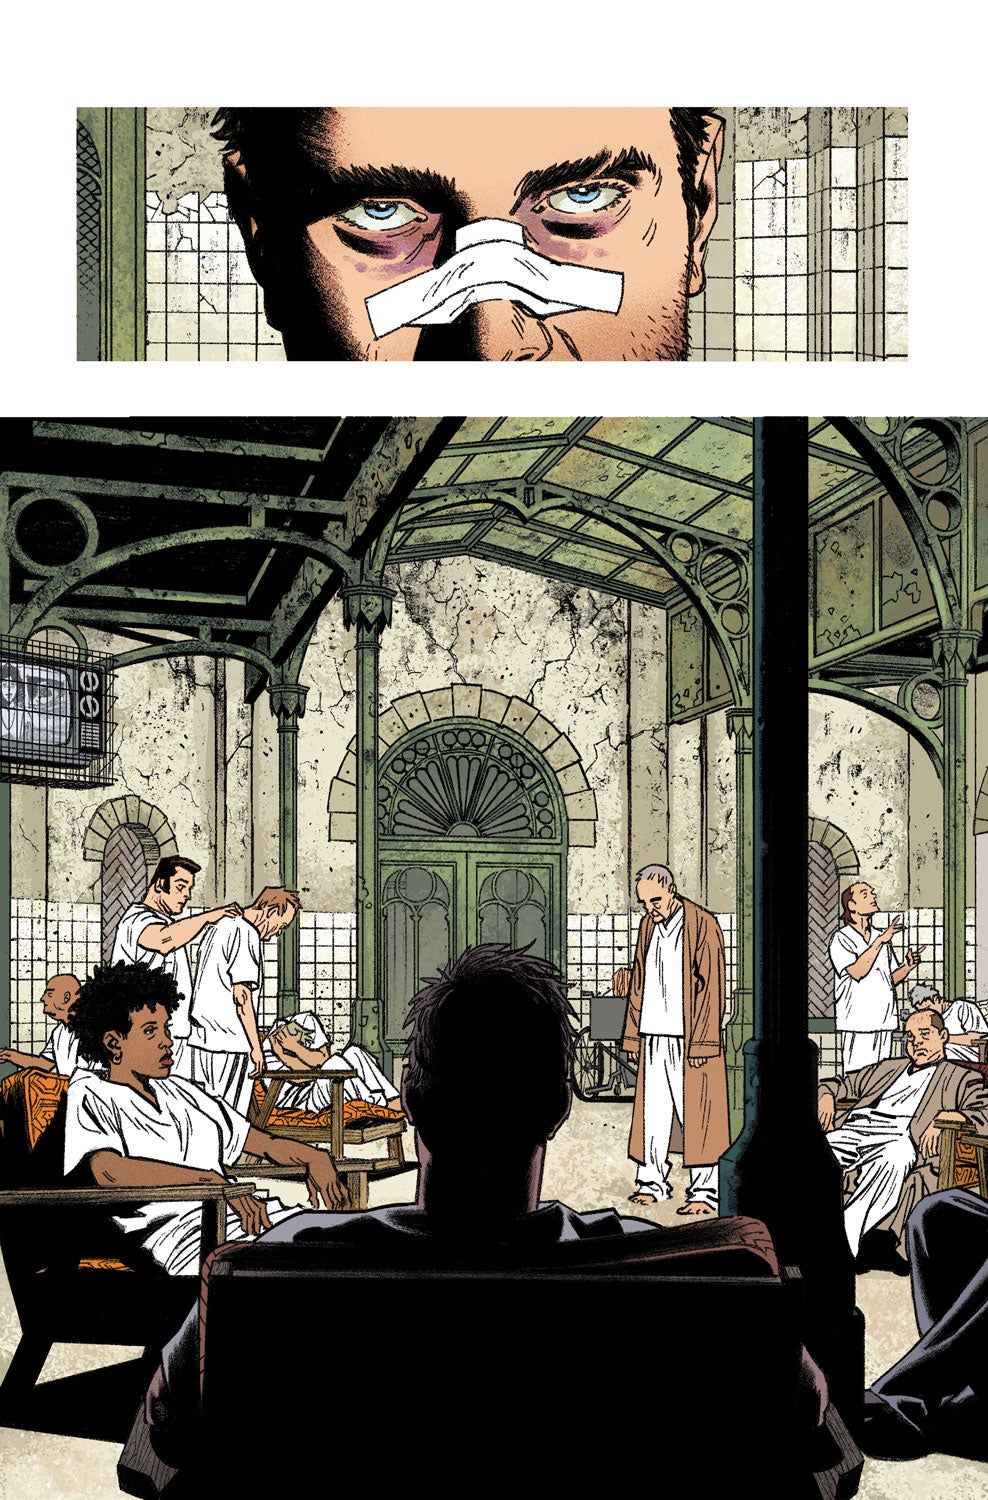 A page from Moon Knight #1 which, clearly, is an influence here. (Image: Marvel Comics/Greg Smallwood and Jordie Bellaire)